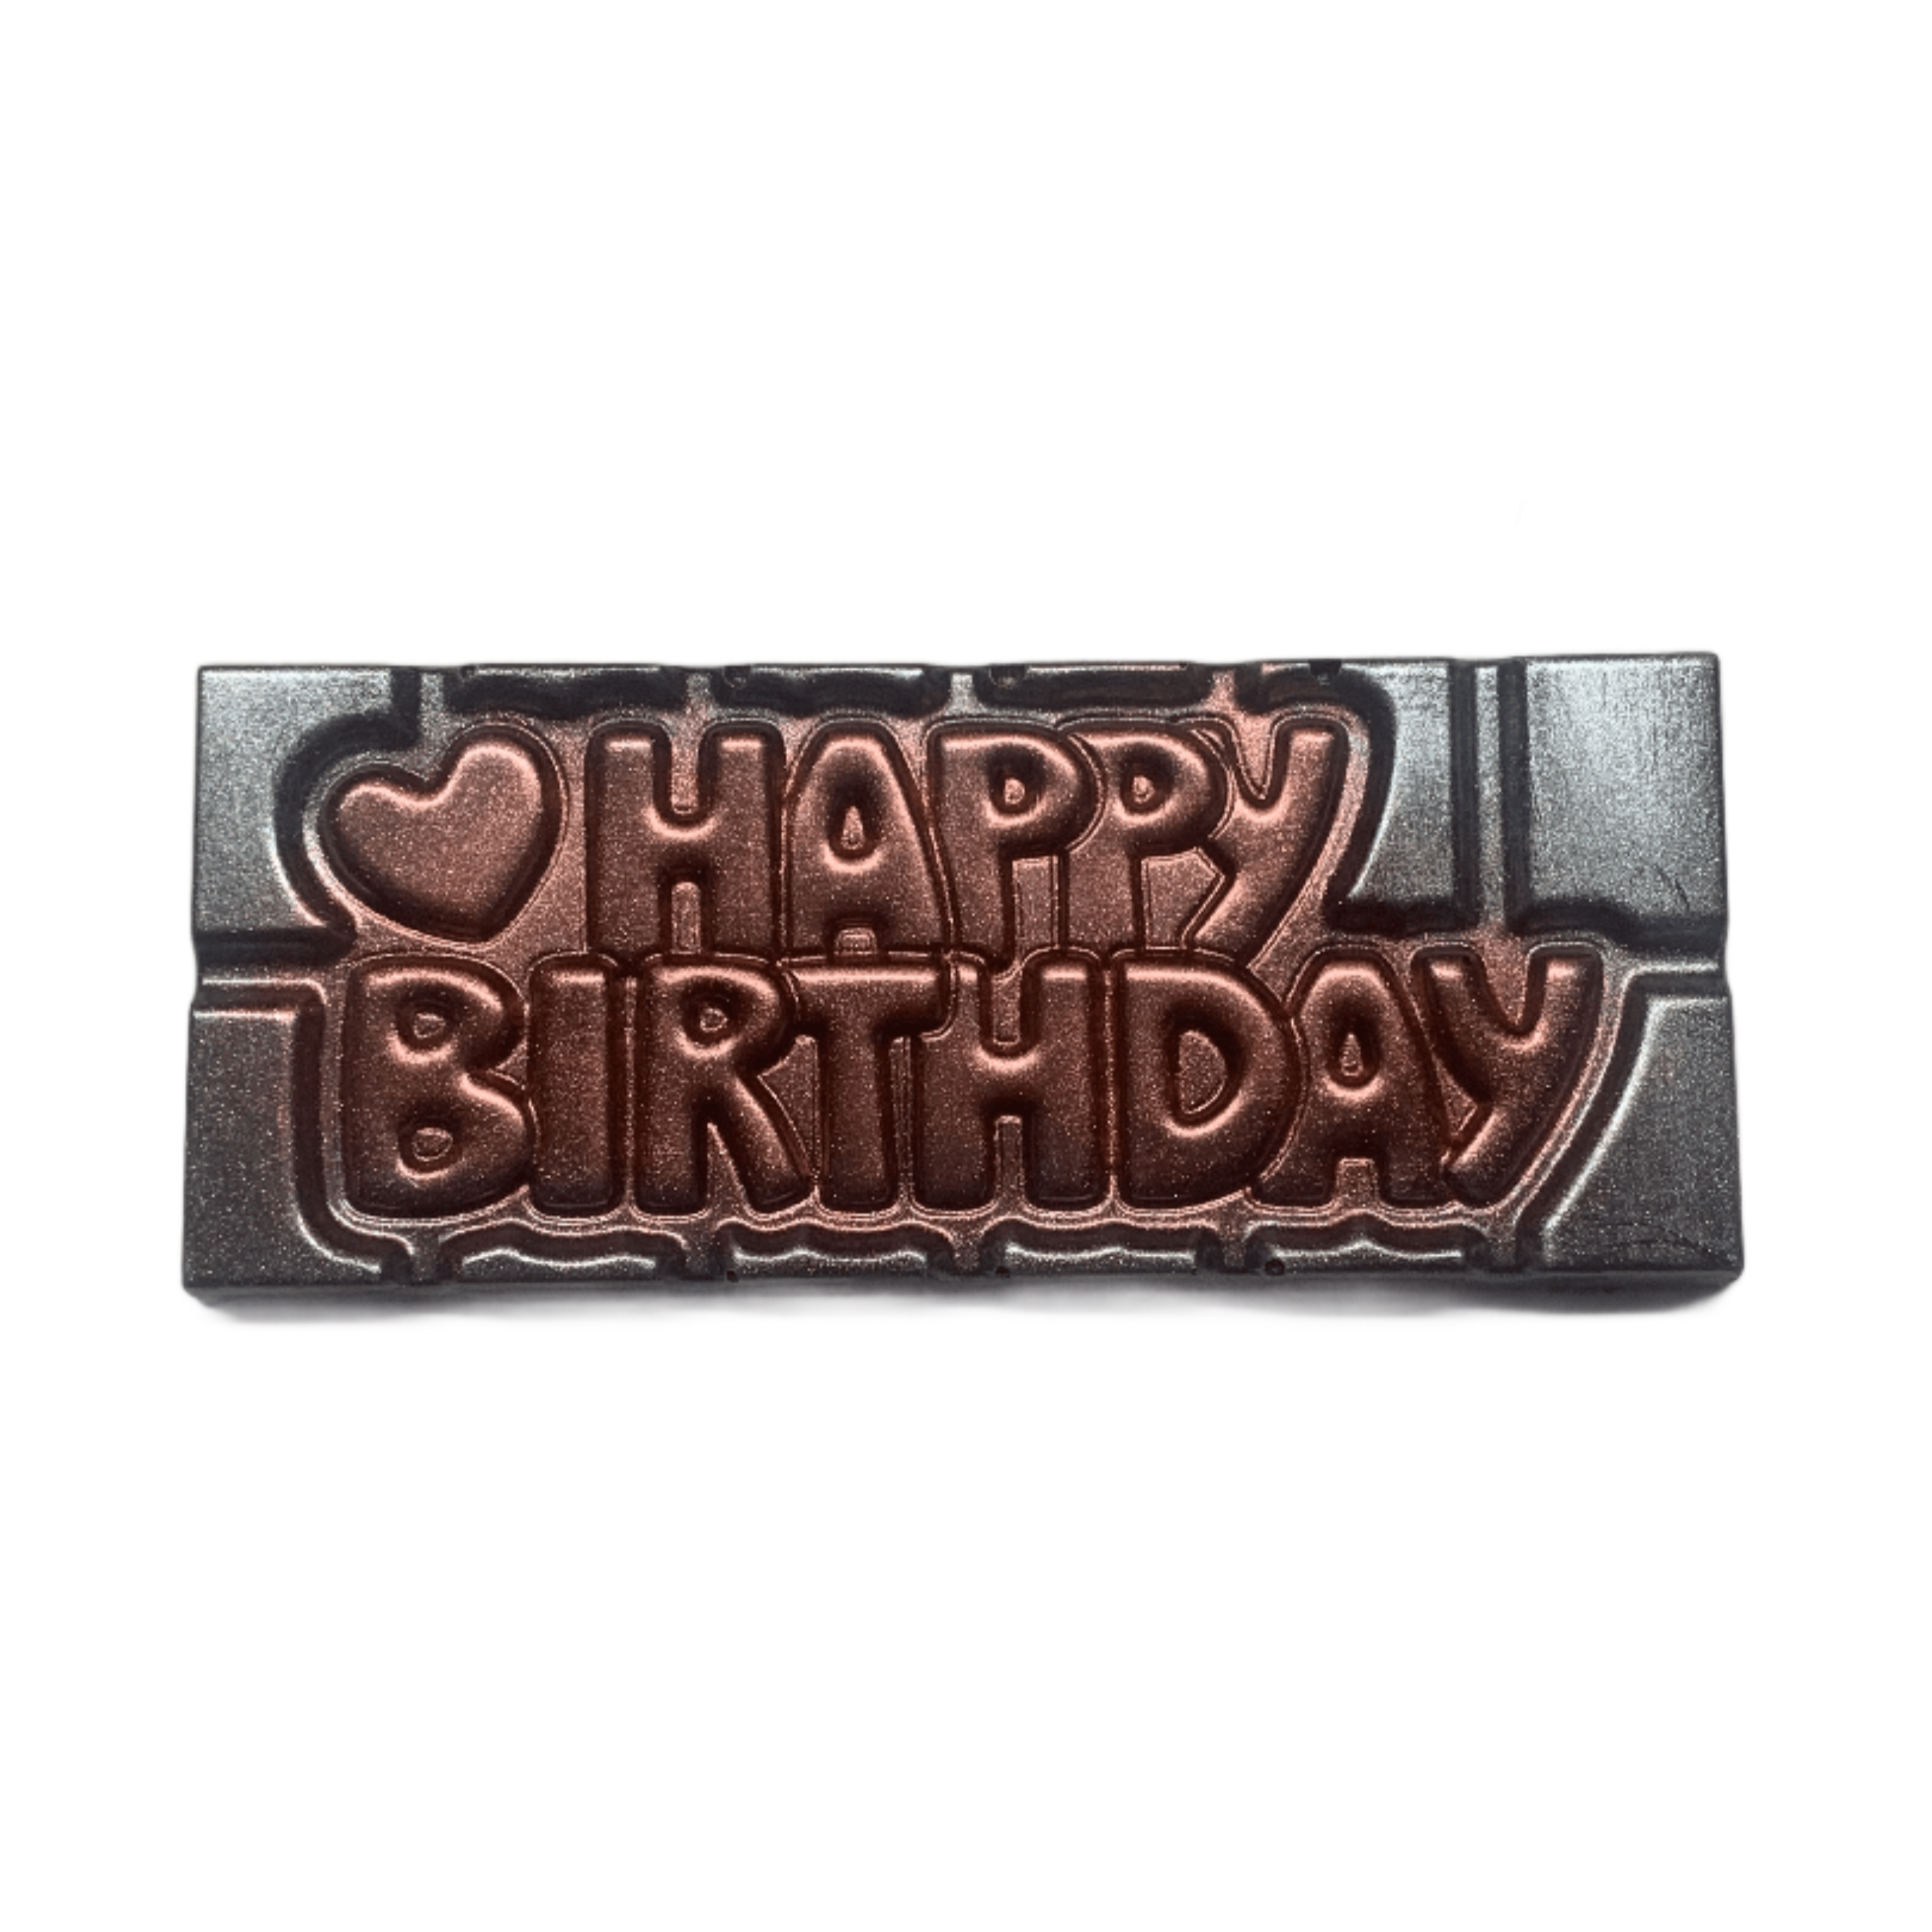 Say_Happy_Birthday_Unwrapped-min.png